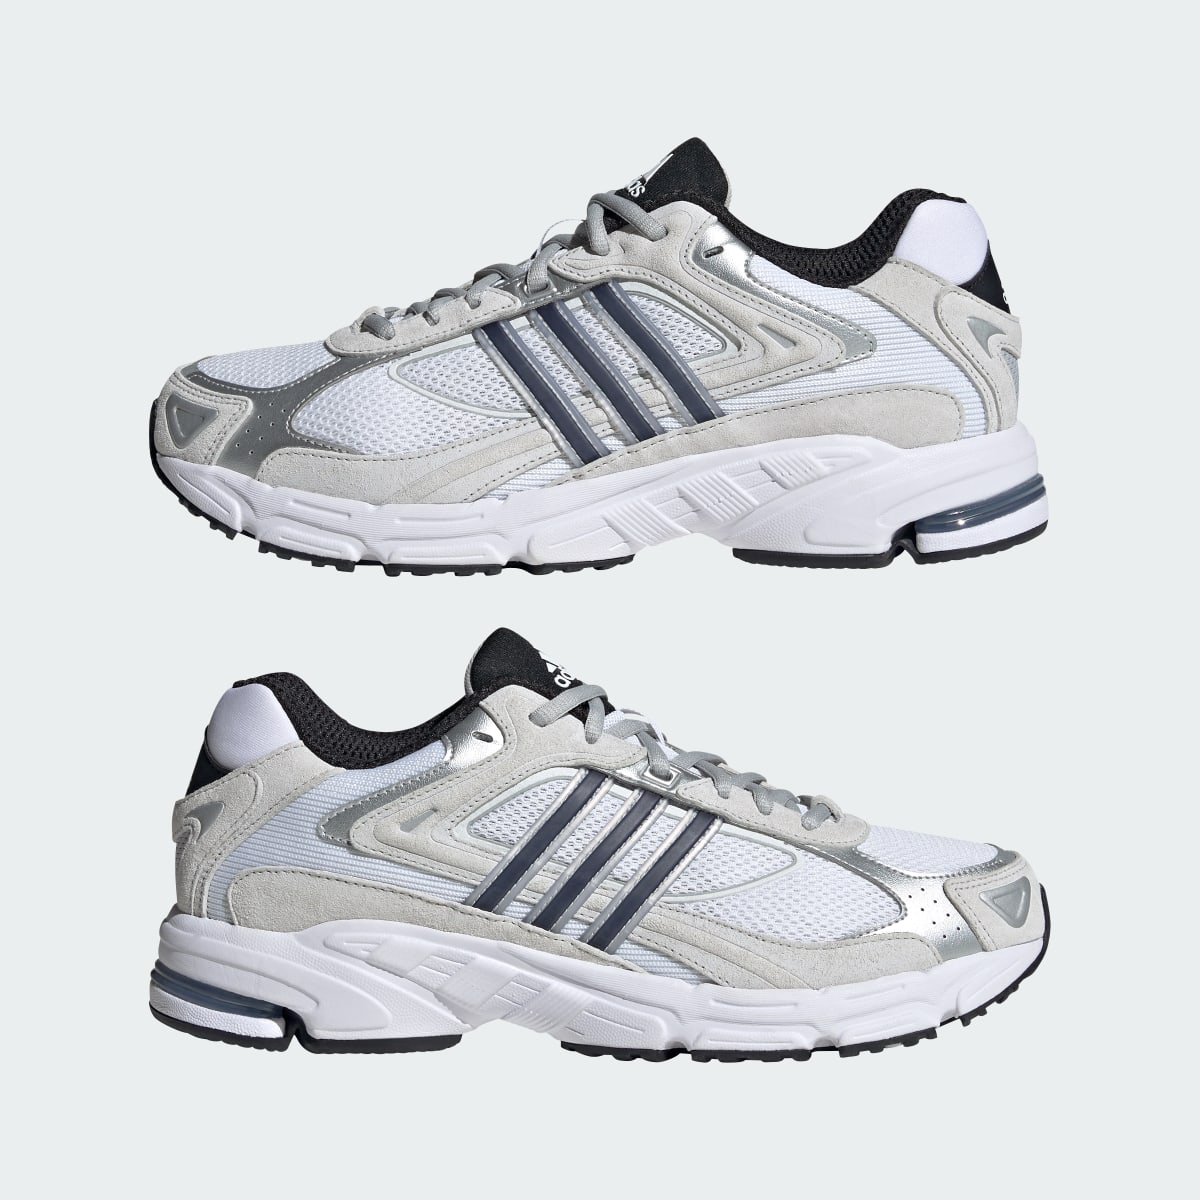 Adidas Response CL Shoes. 8